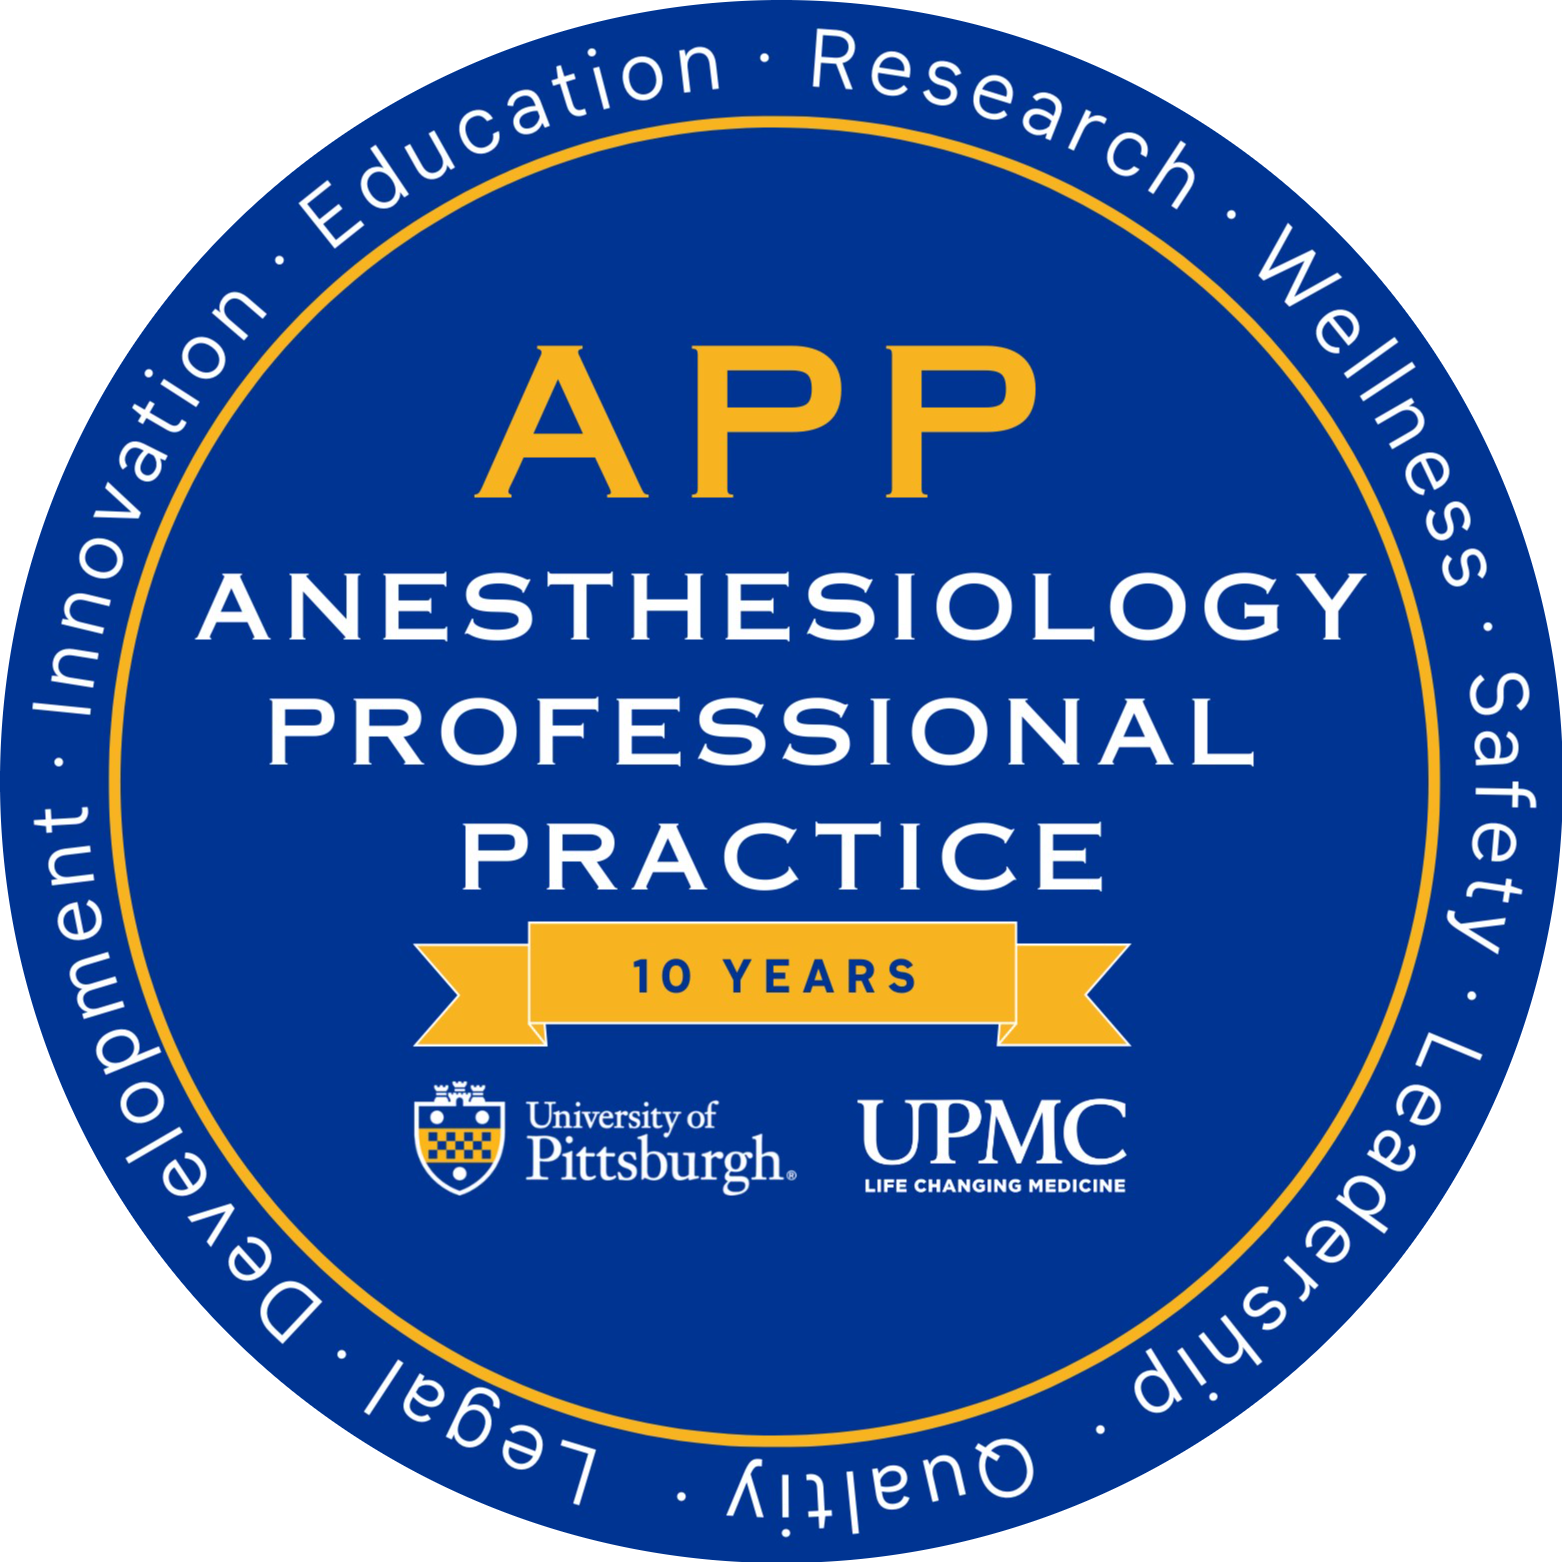 "A graphic logo for the Anesthesiology Professional Practice rotation program"